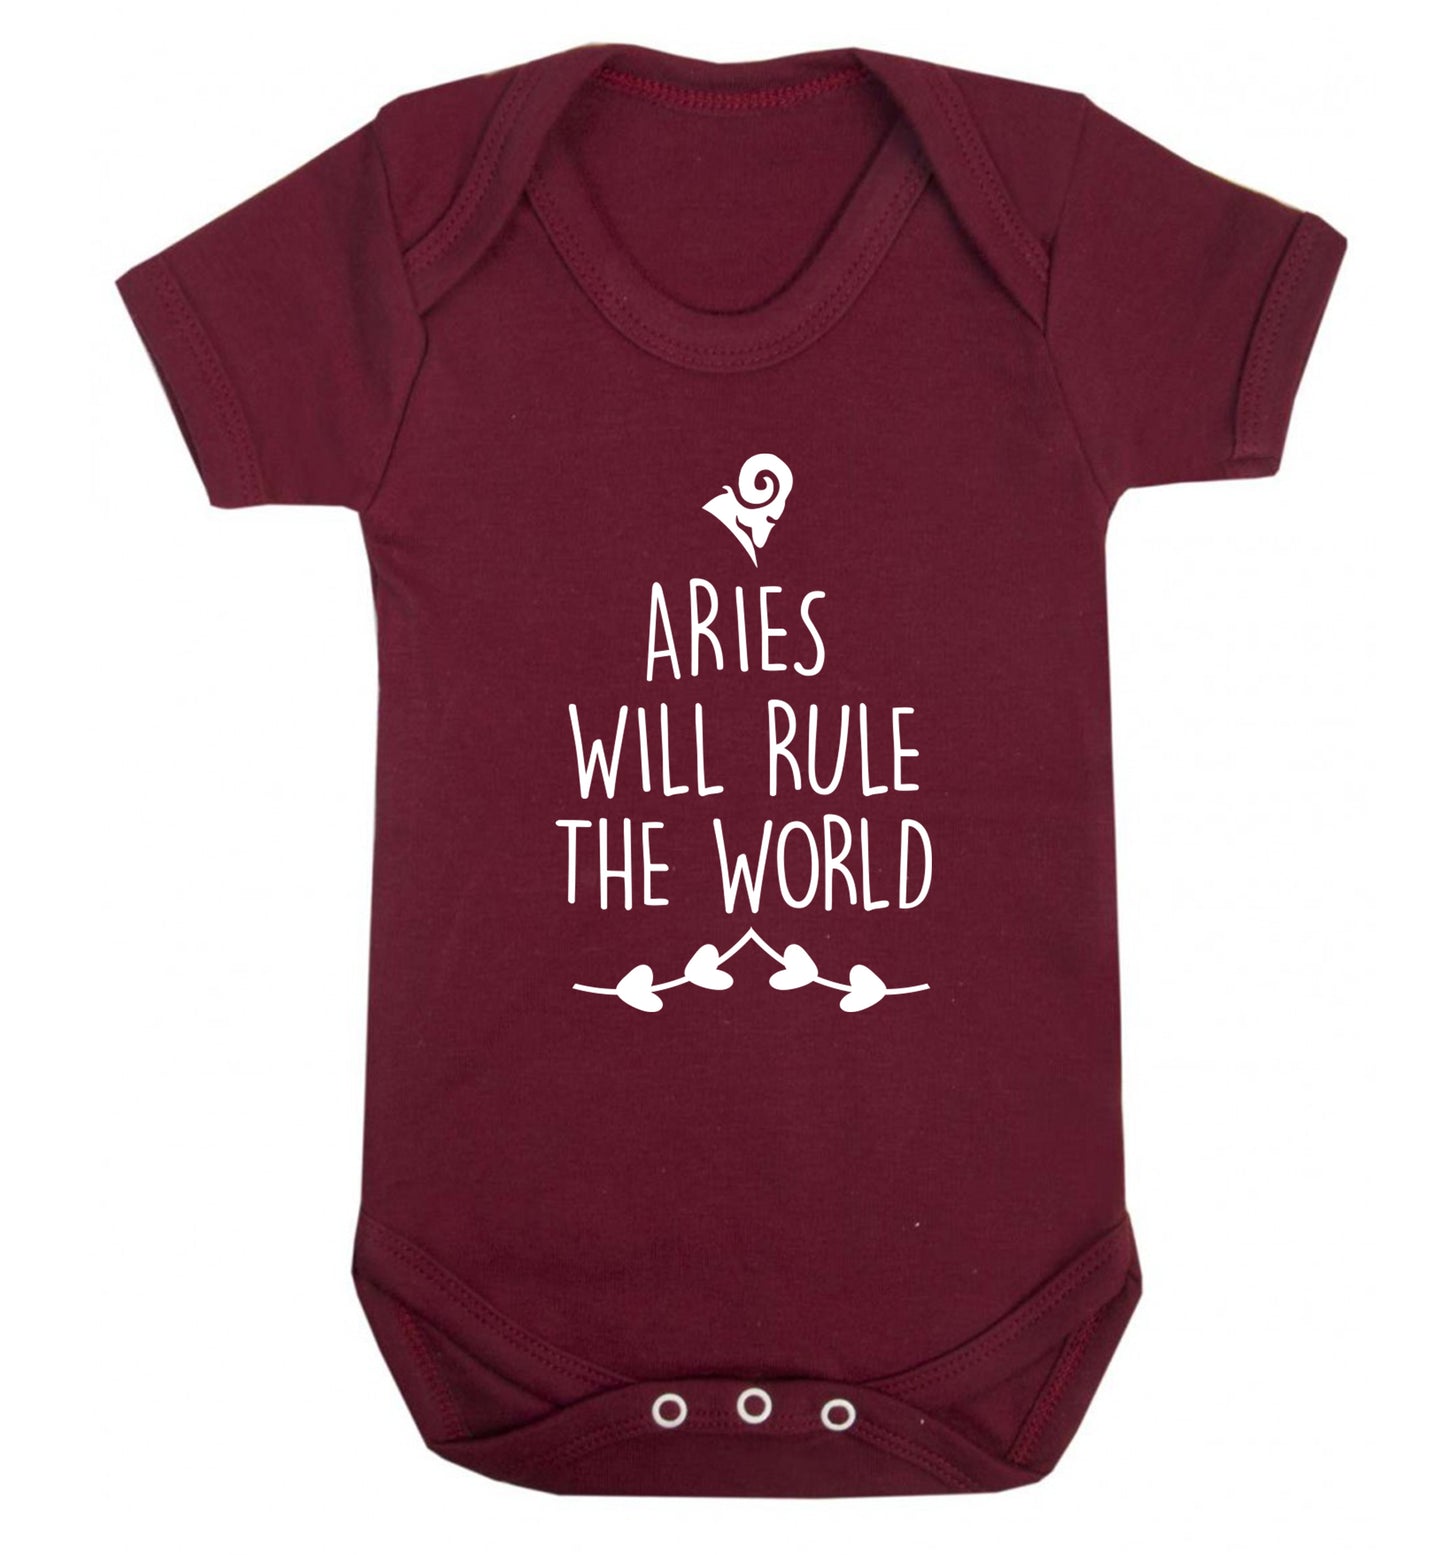 Aries will rule the world Baby Vest maroon 18-24 months